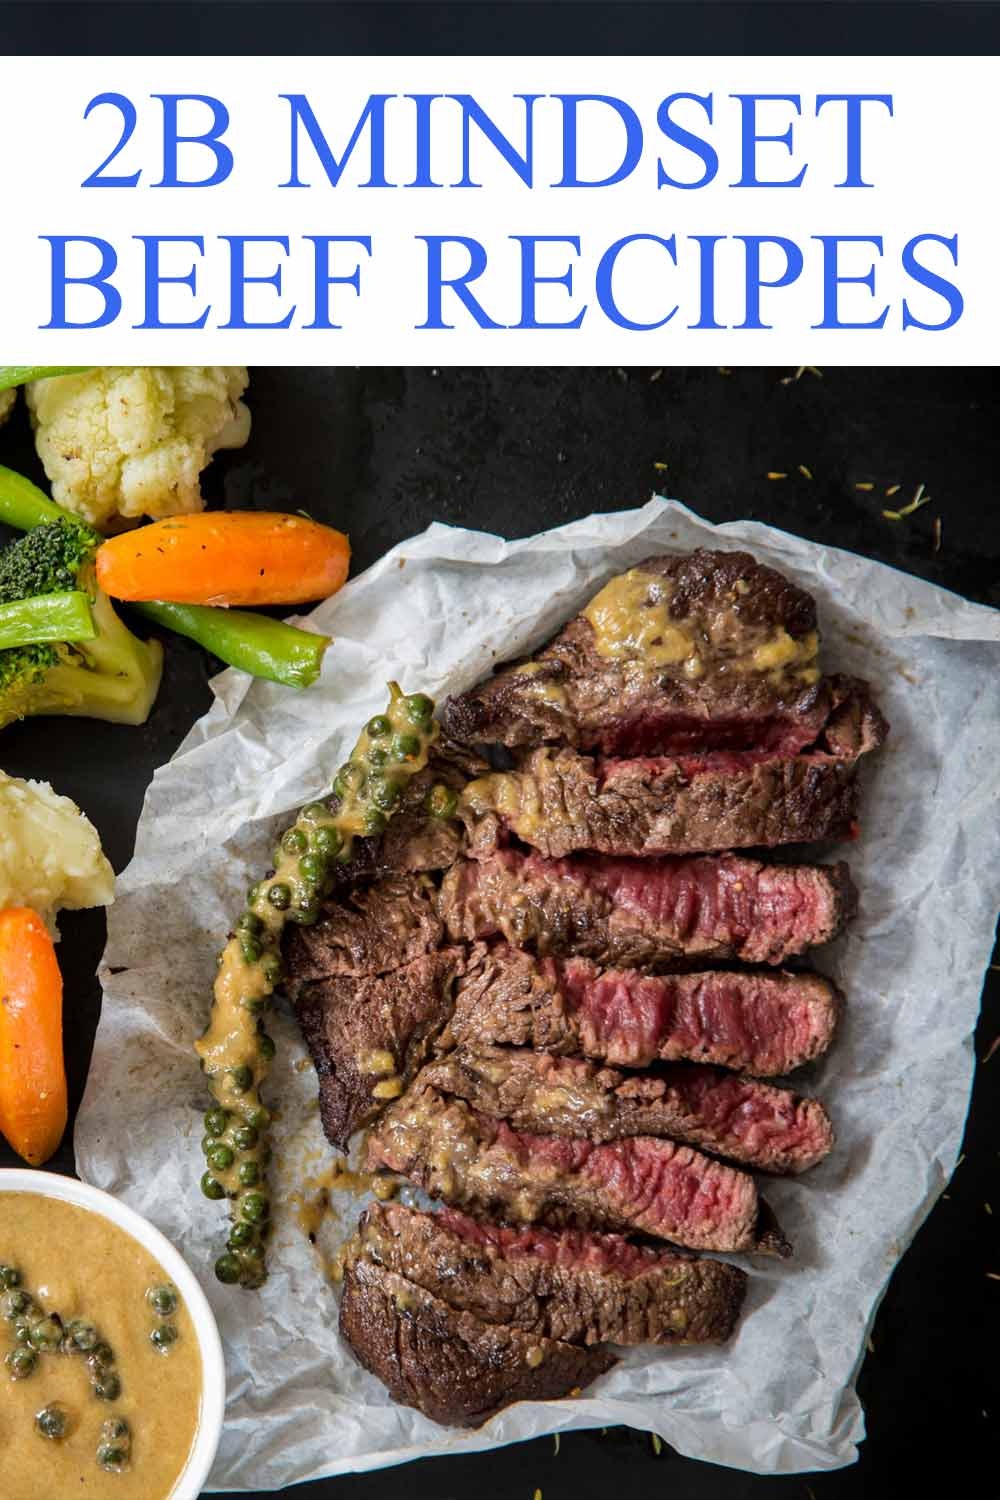 Most 2B Mindset recipes are friendly and completely adjustable and are already geared toward your plan. You will only need to adjust your ratio of veggies to beef to fit your plate and you are on your way! #2BMindset #Recipes #DietRecipes #DinnerRecipes #HealthyRecipes #Health #WeightLoss